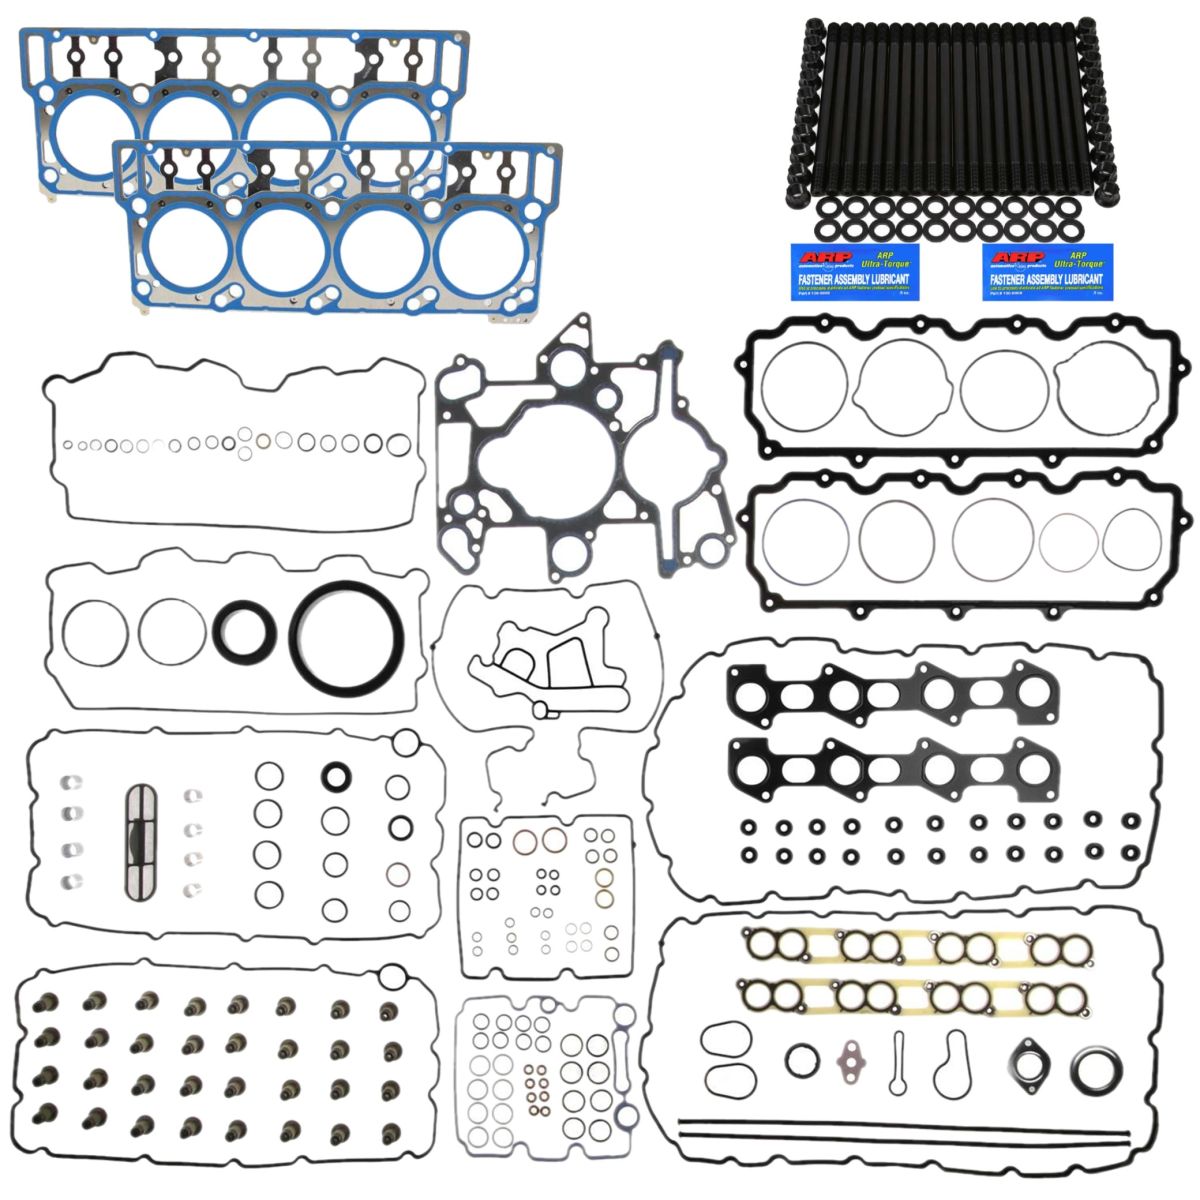 OEM Ford - OEM 20MM Head Gaskets/ARP Studs/Mahle Gasket Kit For 03-06 Ford 6.0L Powerstroke